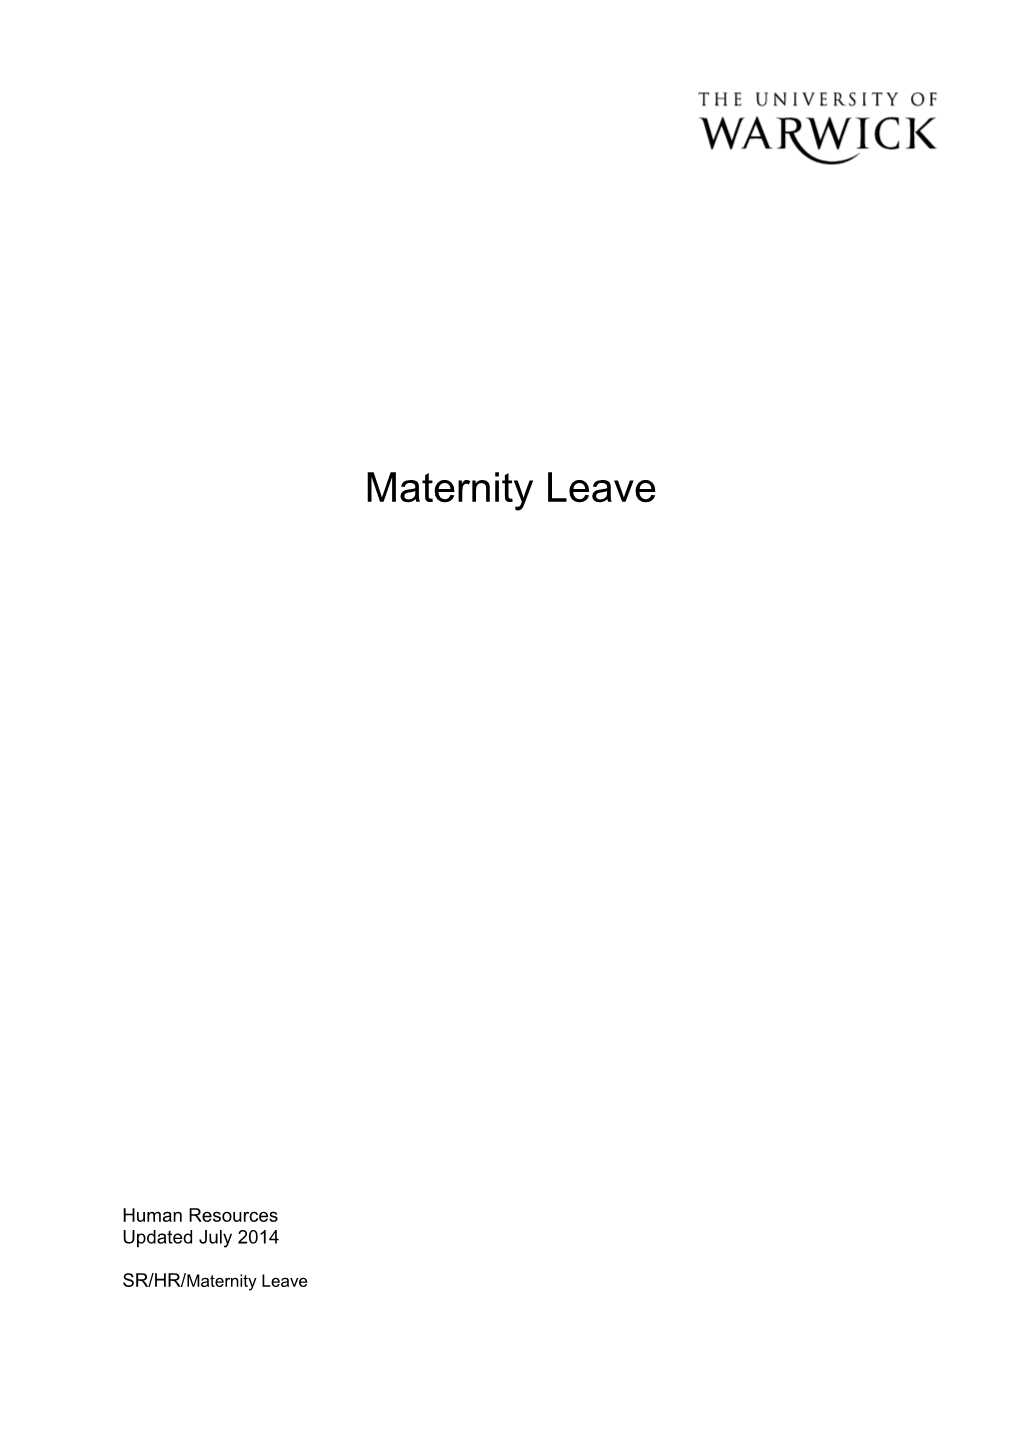 Maternity Leave and Pay